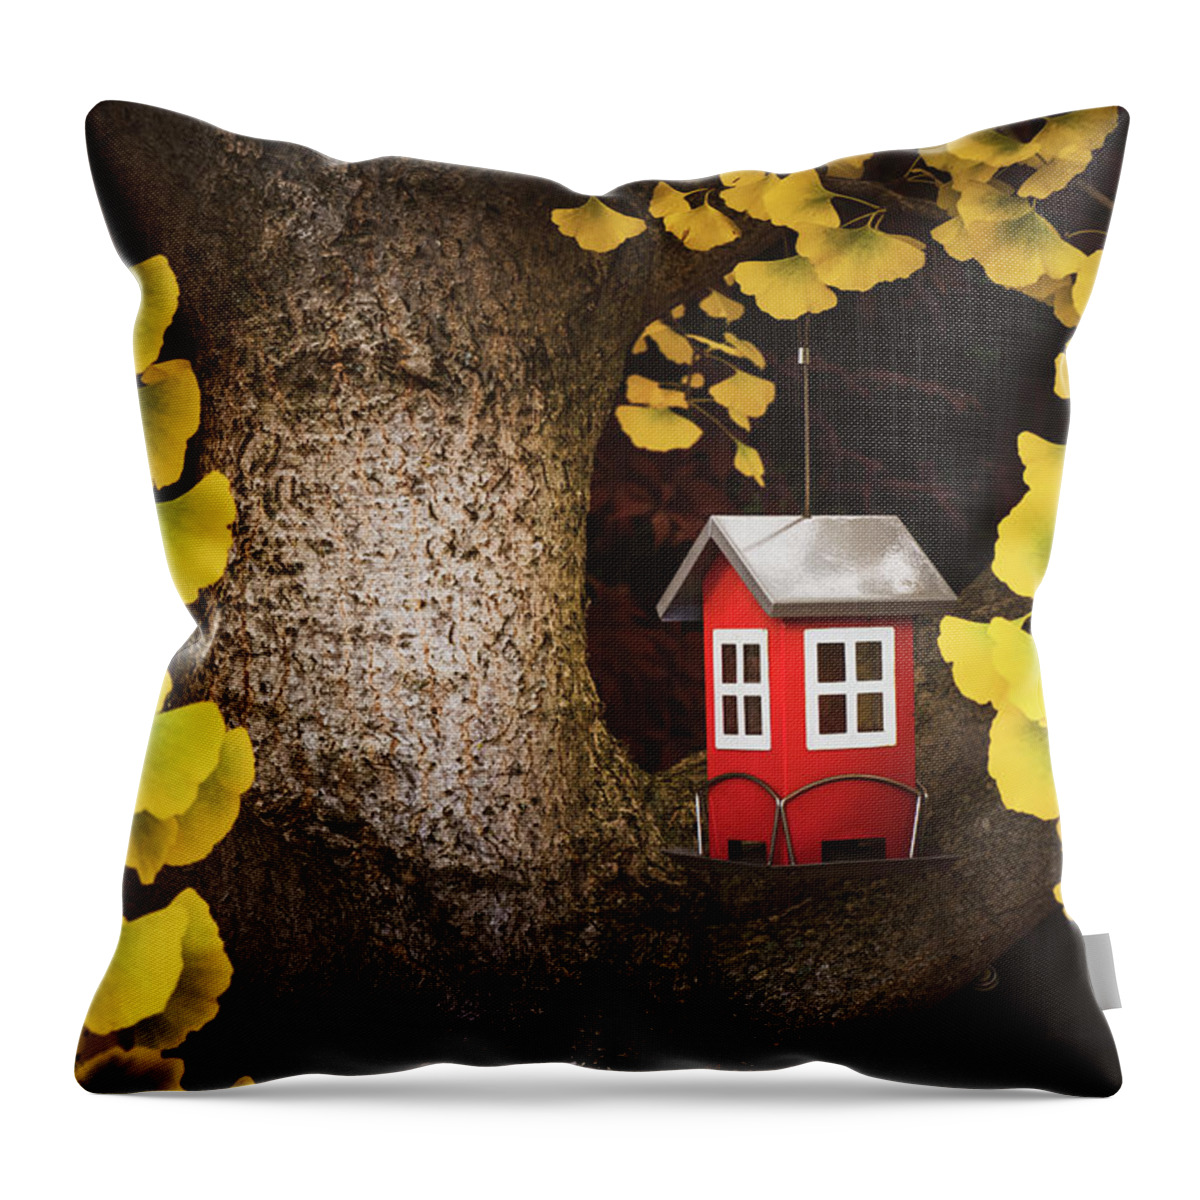 Autumn Throw Pillow featuring the photograph The Red Refuge by Philippe Sainte-Laudy